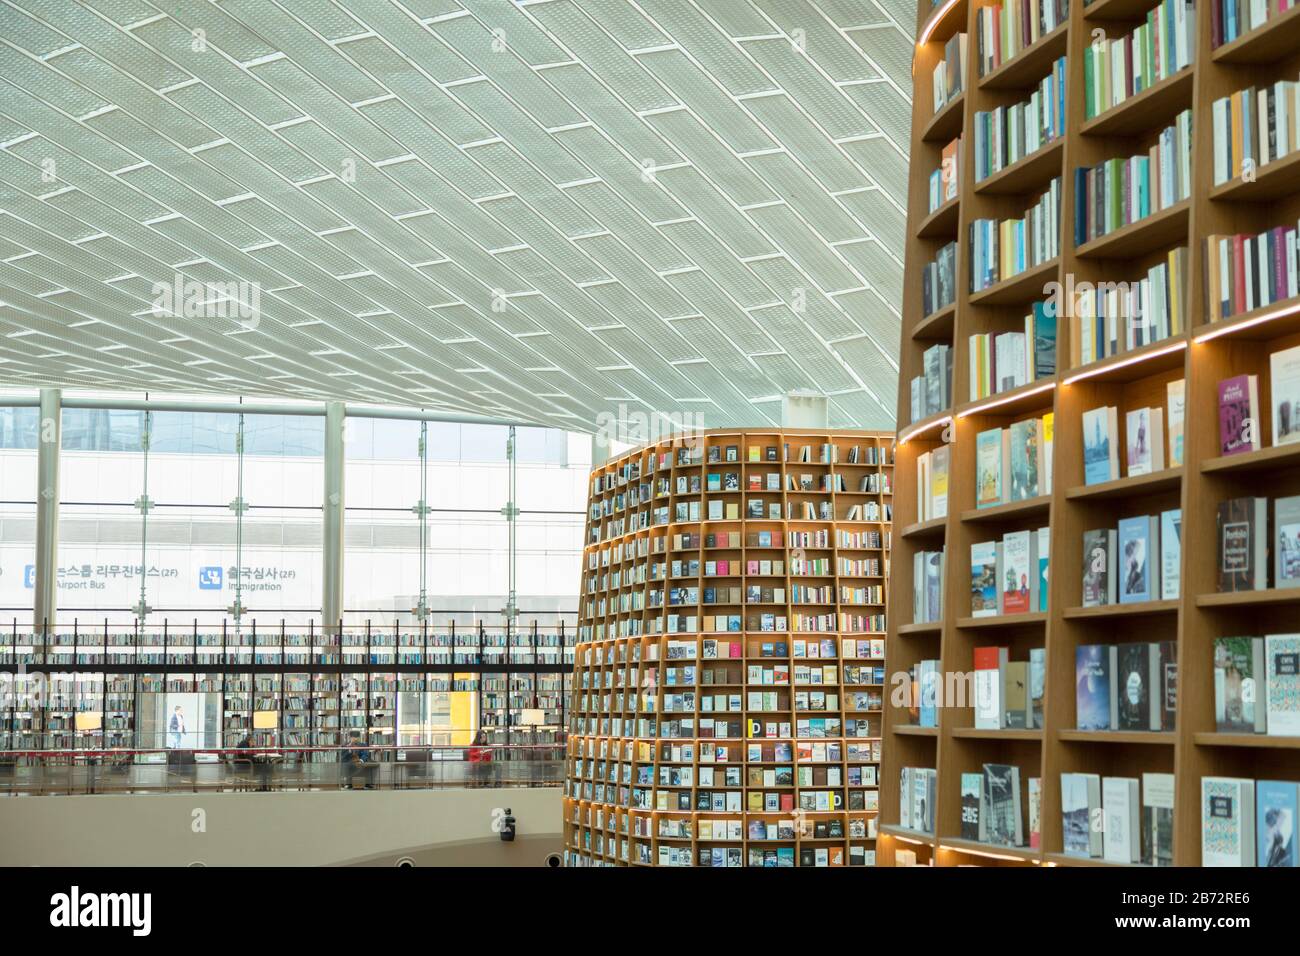 Starfield Library in COEX Mall, Seoul, South Korea Stock Photo